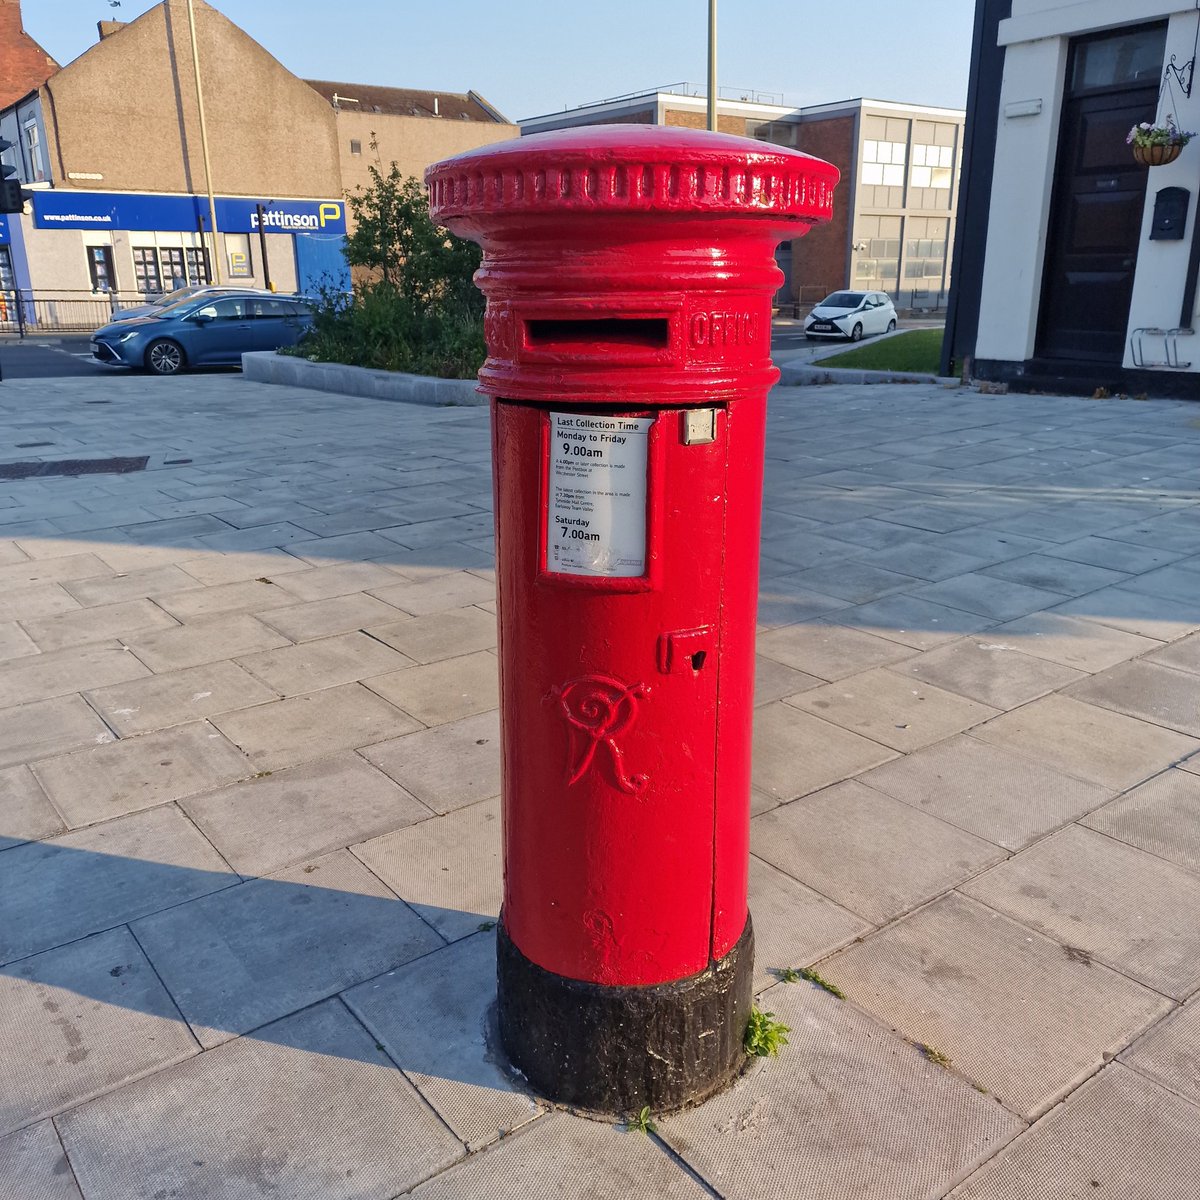 Cracking Victoria Regina box found outside the Cask Lounge in South Shields earlier this evening.

#LittleRedBoxes #RoyalMail #VictoriaRegina #QueenVictoria